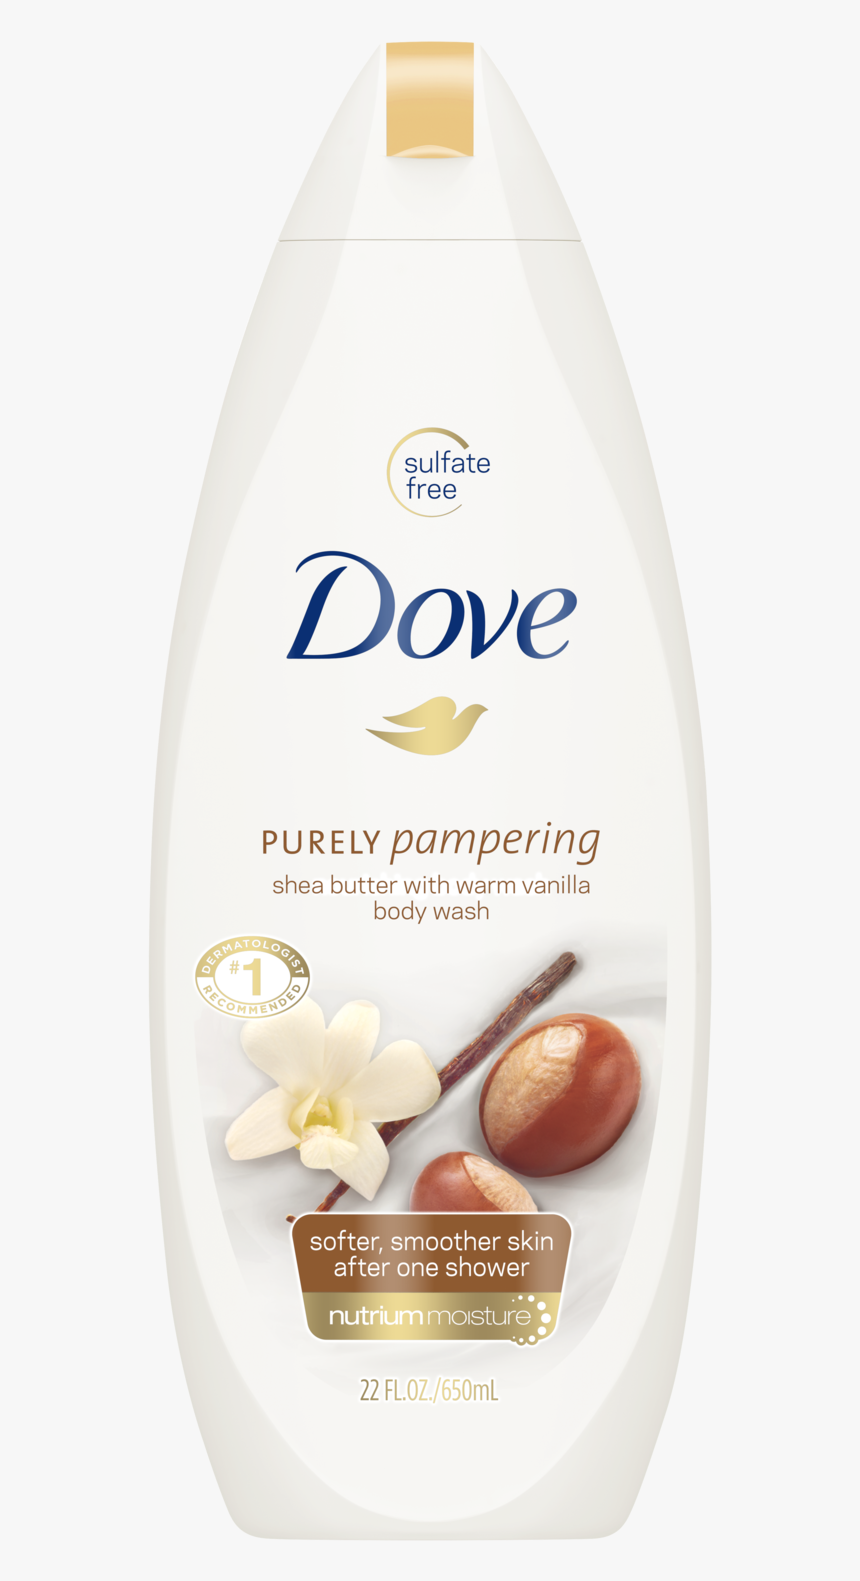 Dove Purely Pampering Shea Butter With Warm Vanilla - Sensitive Skin Dove Body Wash